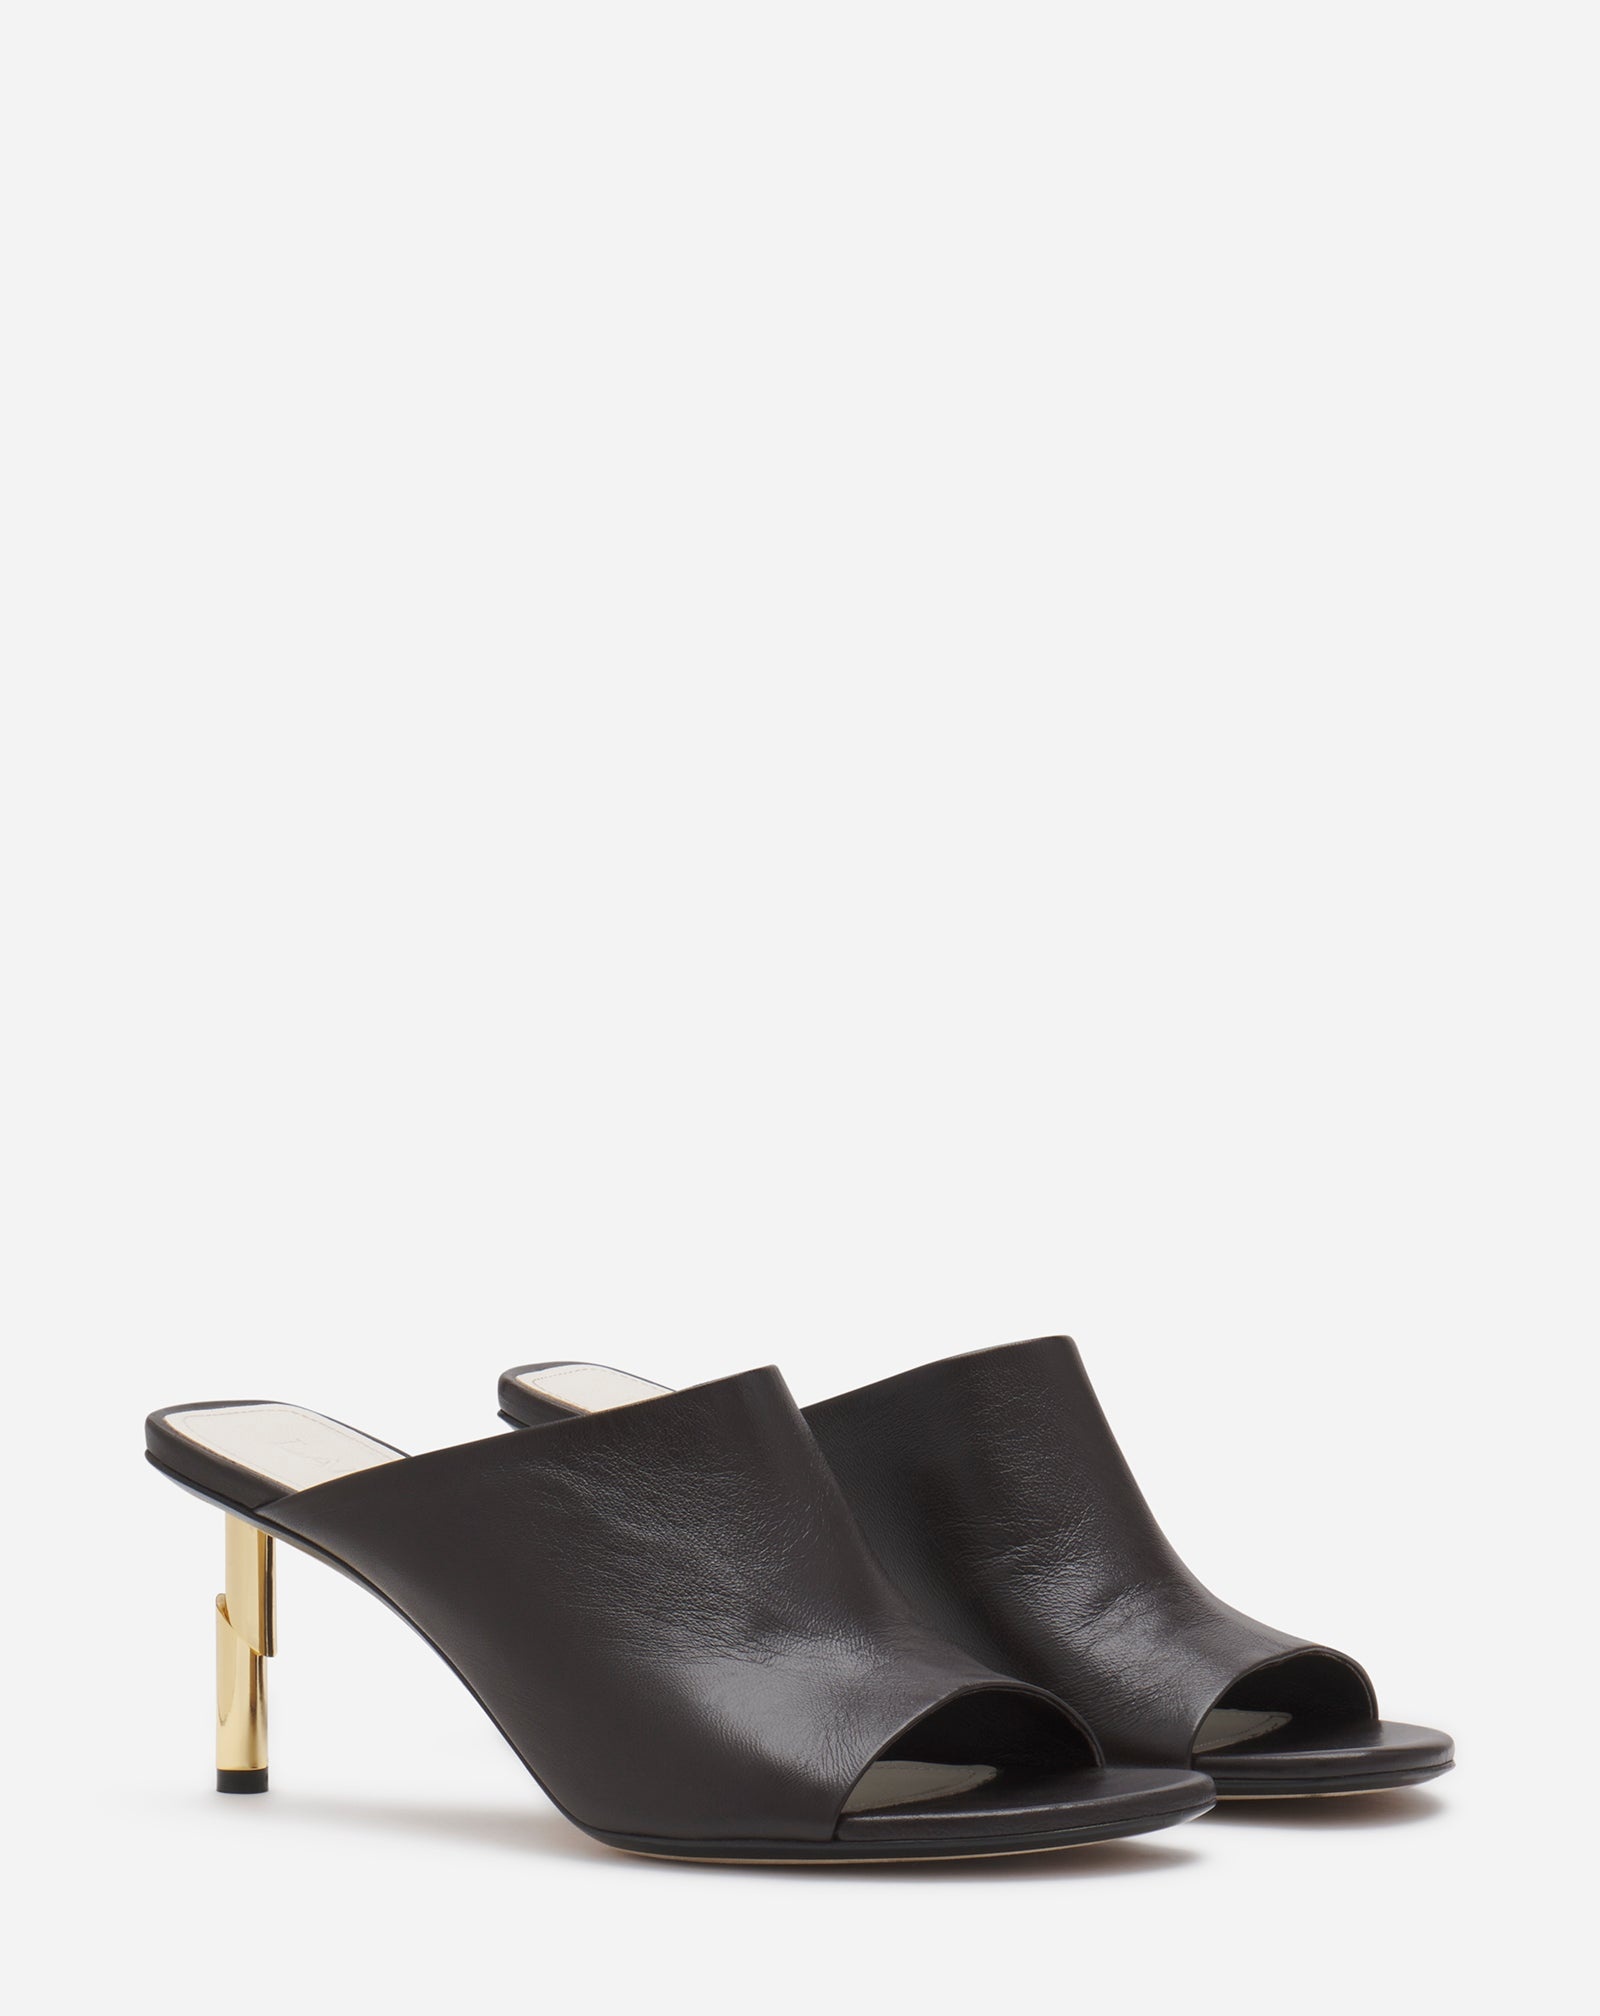 LEATHER SEQUENCE BY LANVIN MULES - 2